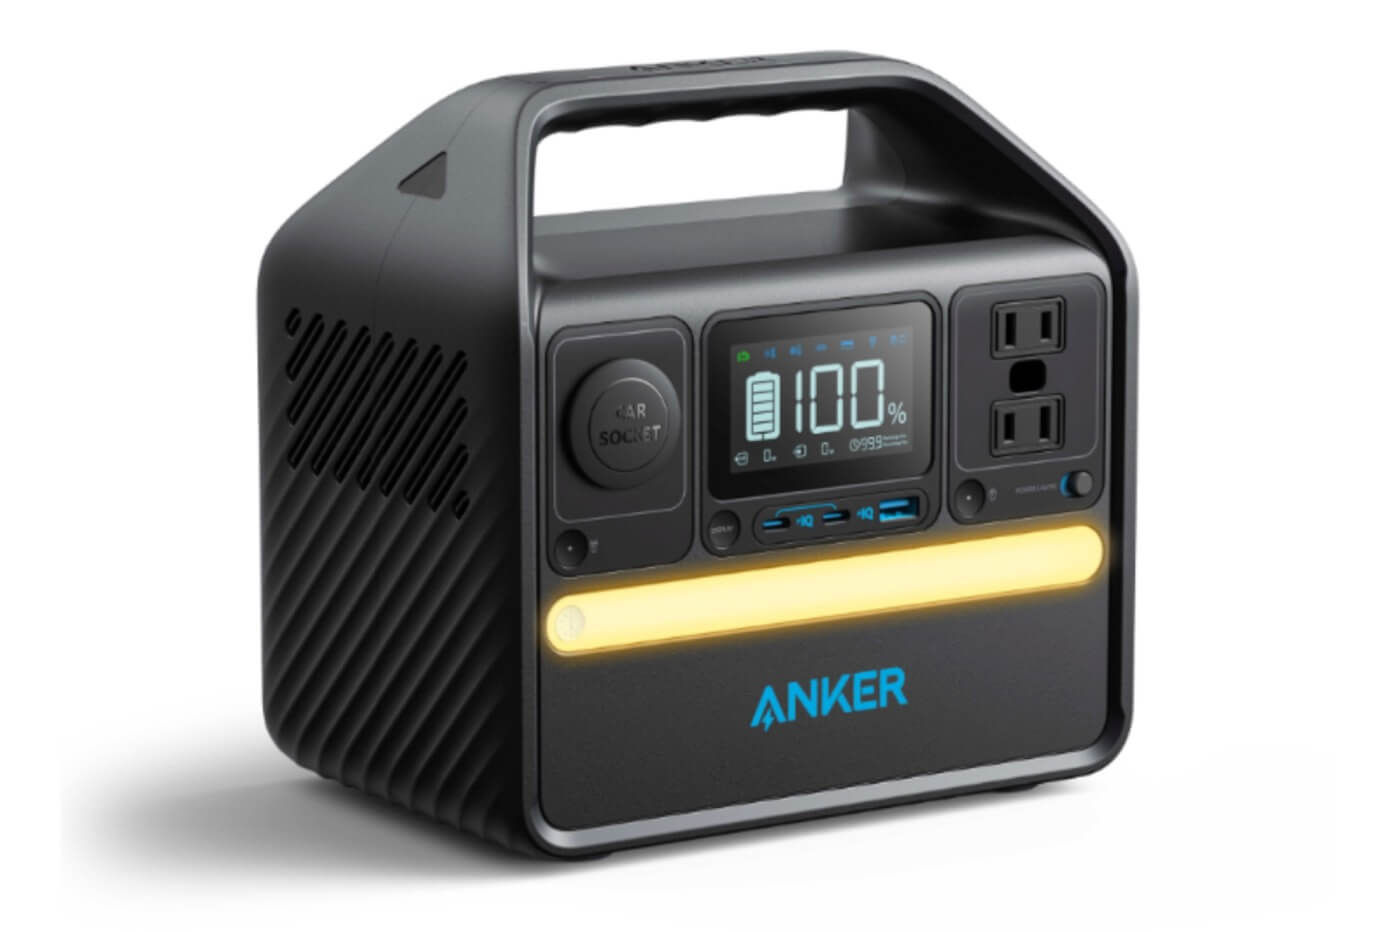 Anker、コンパクトで容量320Whのポータブル電源｢Anker 522 Portable Power Station (PowerHouse 320Wh)｣を発売